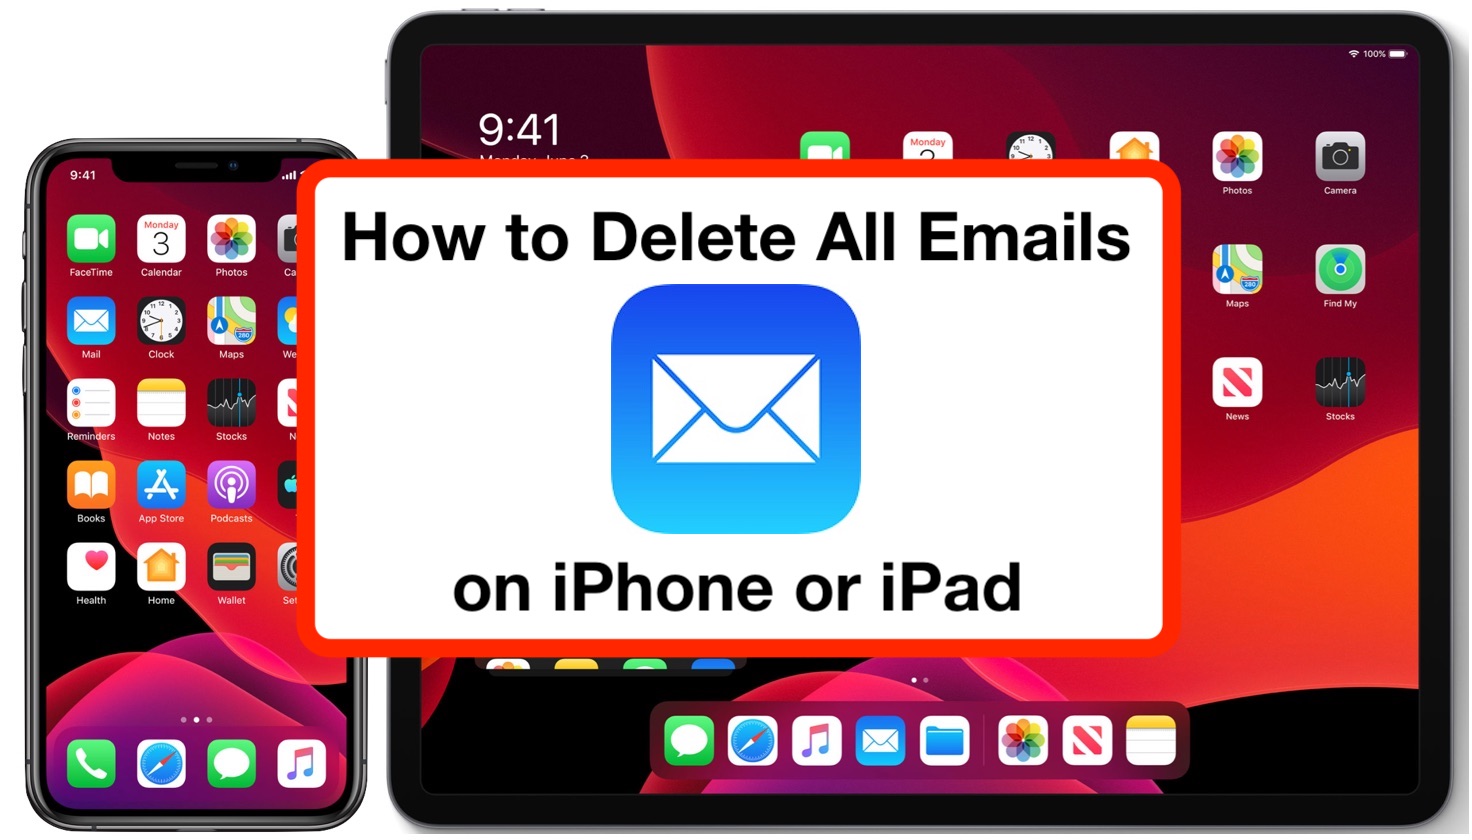 How to Delete All Email on iPhone & iPad with iOS 13